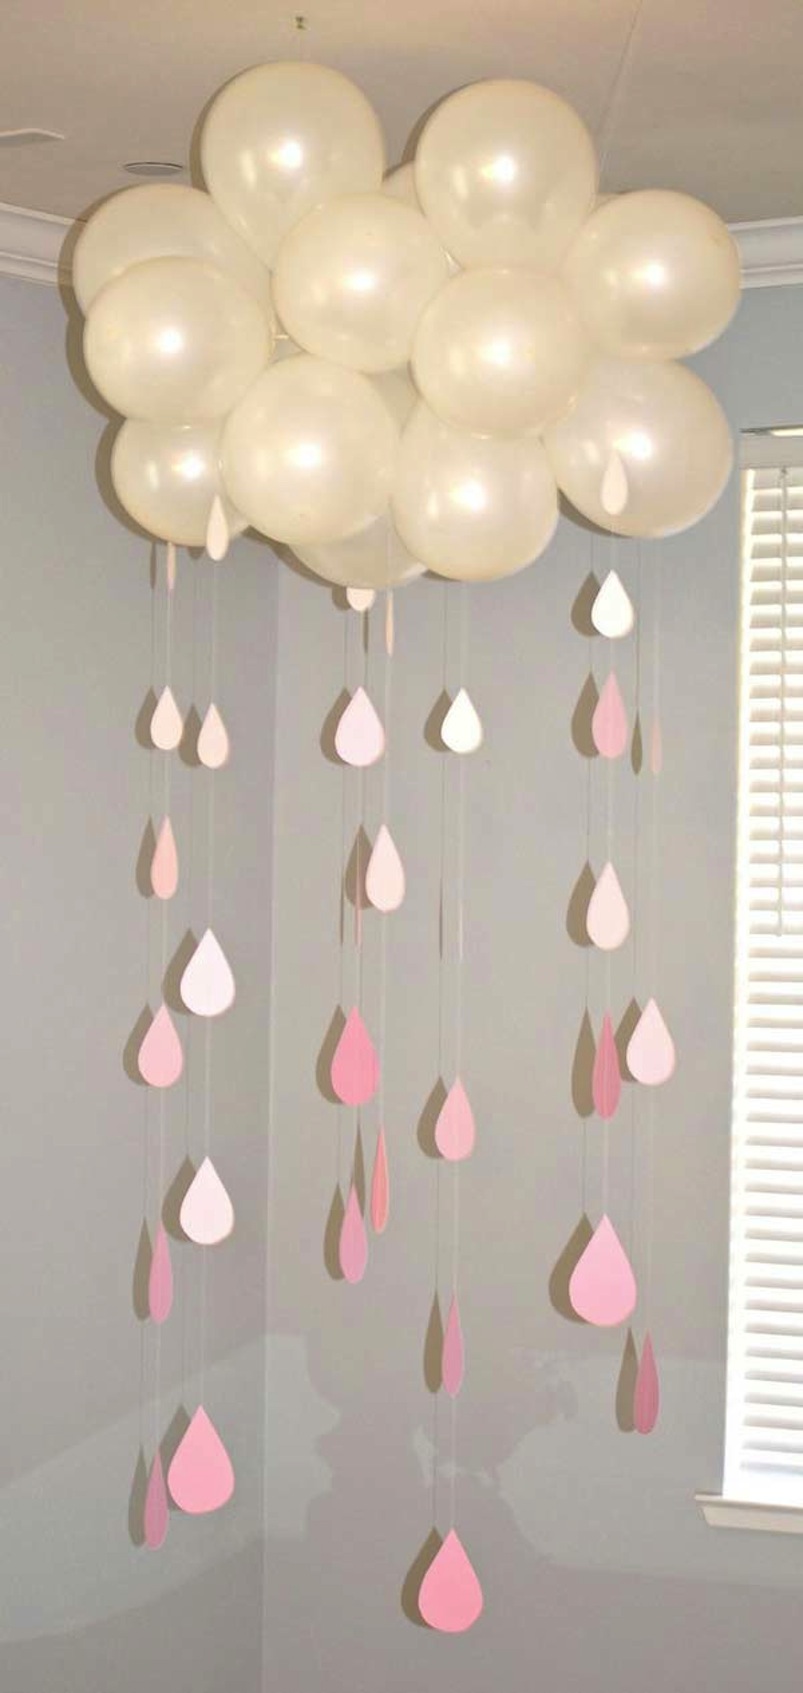 Pretty pink raindrops and a balloon cloud